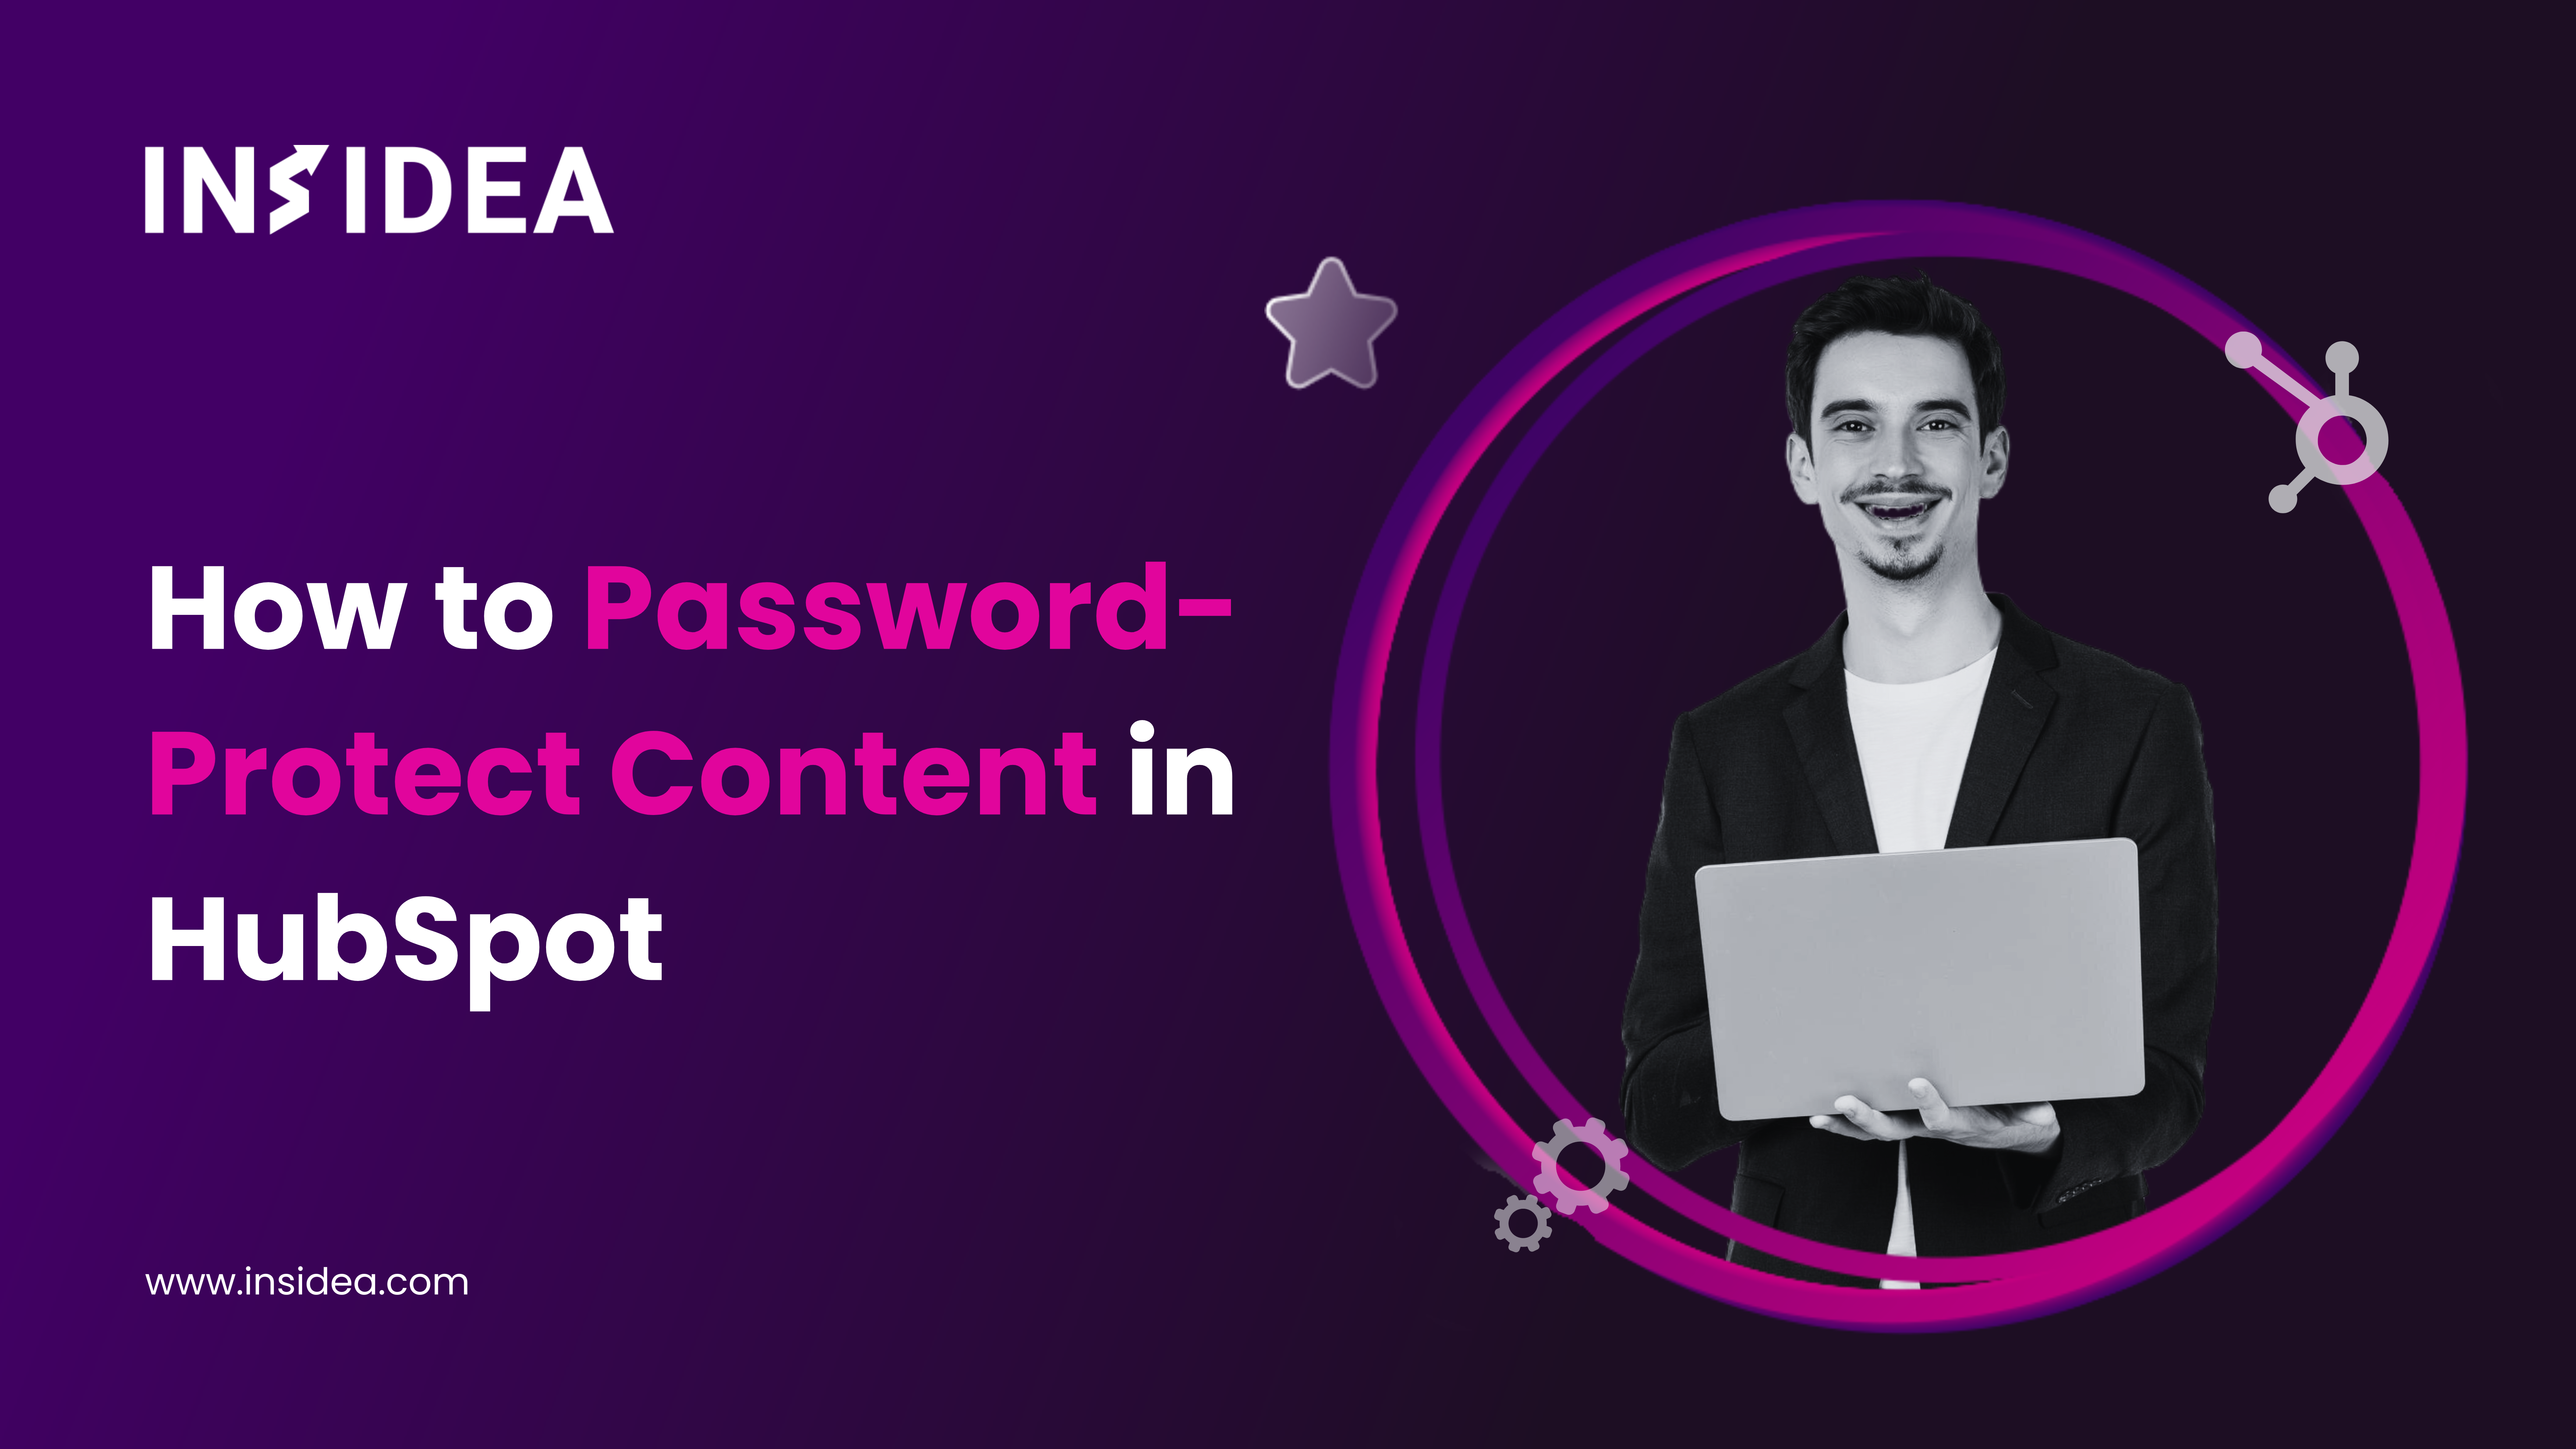 How to password-protect content in HubSpot?